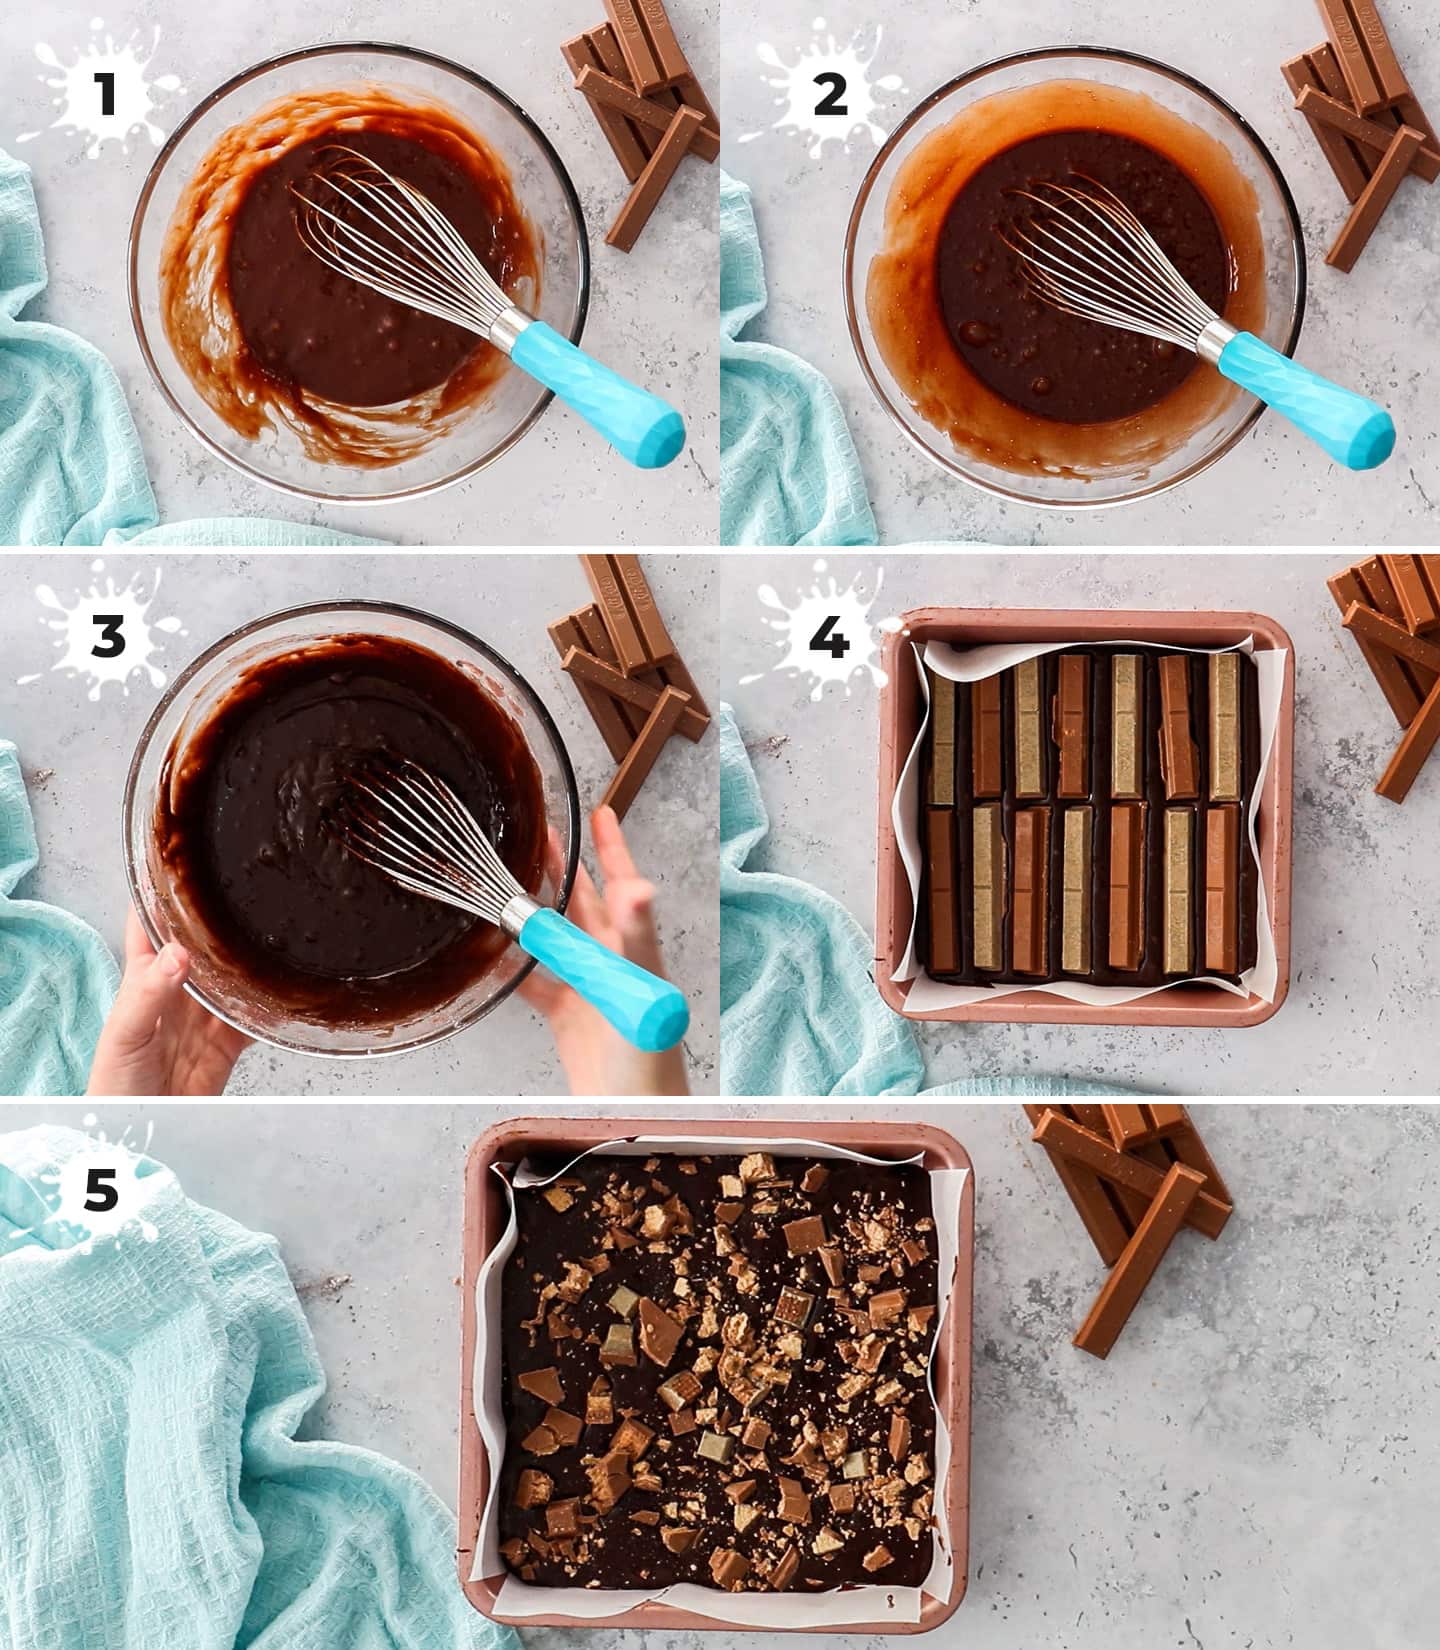 A collage of 5 images showing how to make Kit Kat brownies.